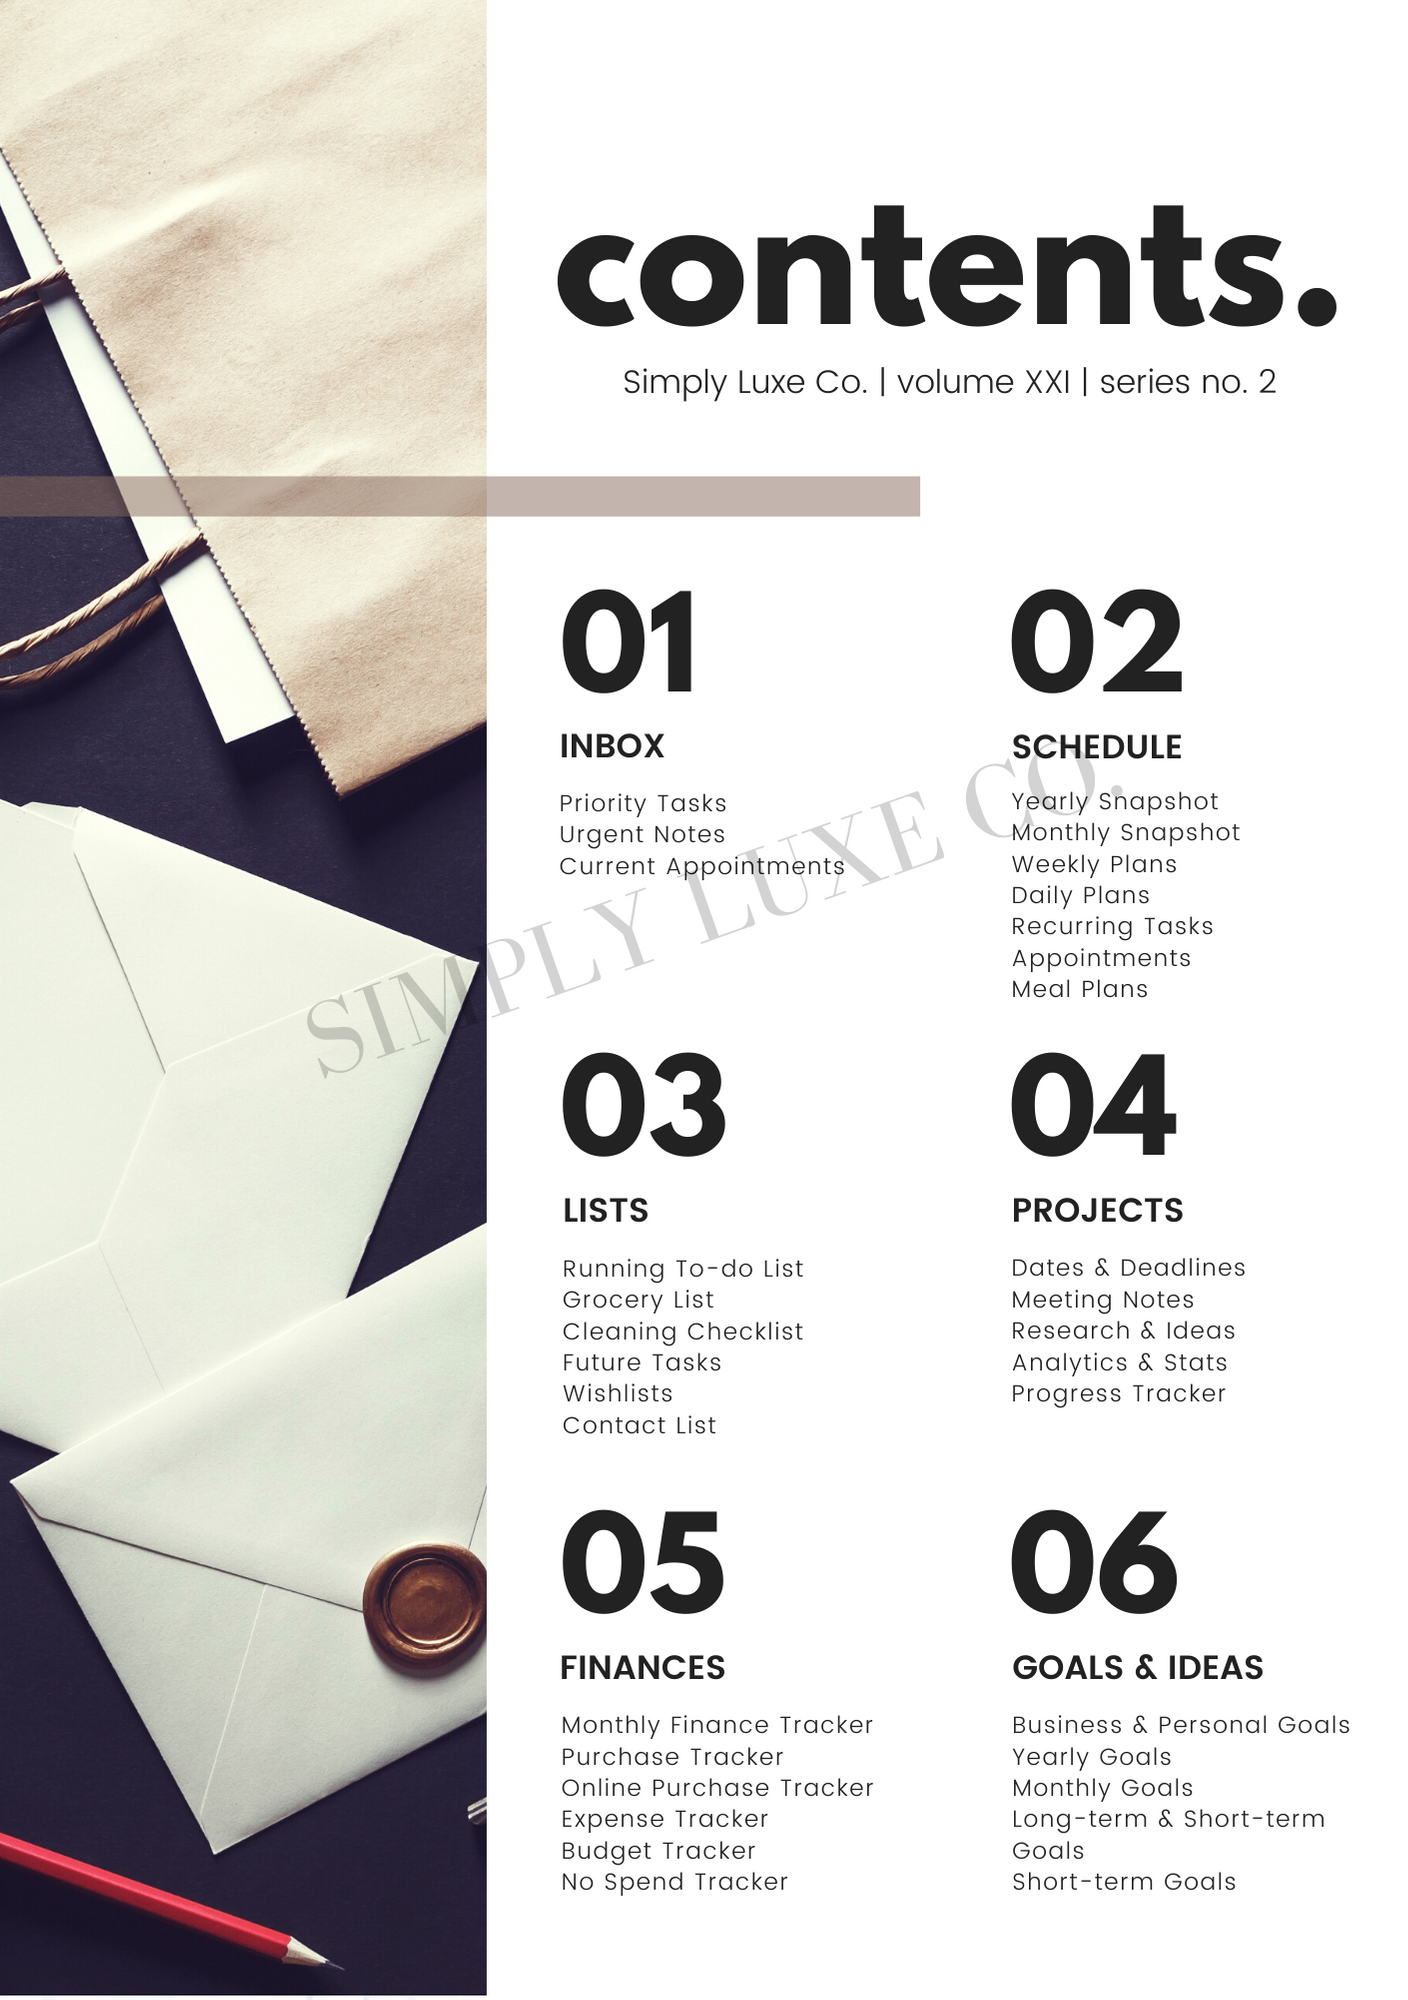 table of contents "Editorial Edition" - style four